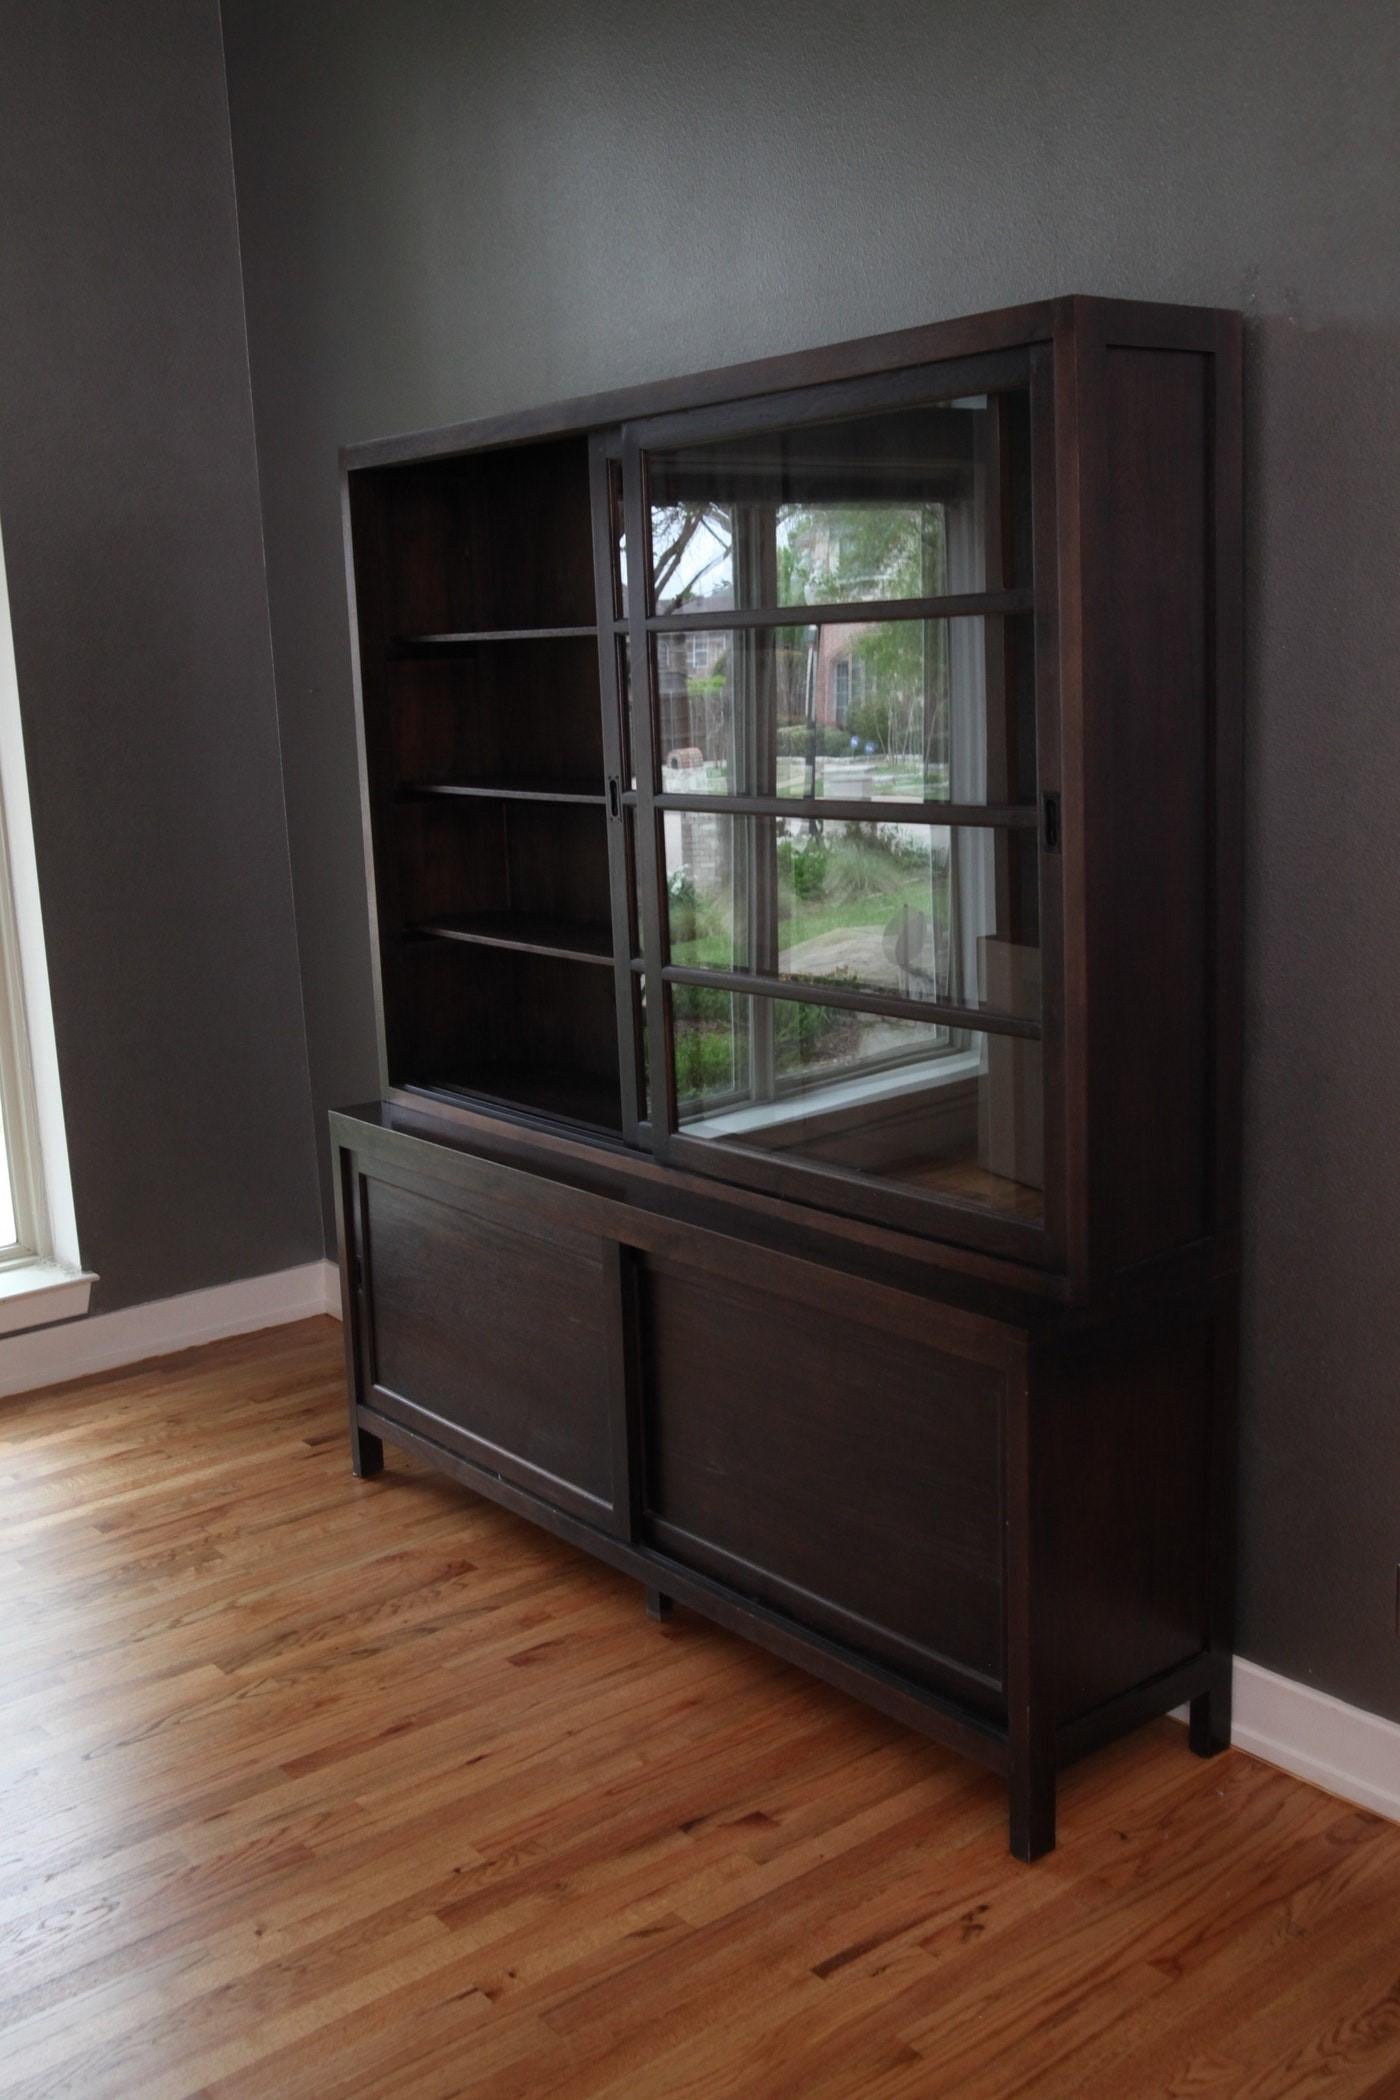 This handsome ebonized Bibliotheque comes in two parts; the upper bookcase boasts two glass front upper sliding doors that close before adjustable shelves. The glass front display and closed storage is both functional and highly decorative. The